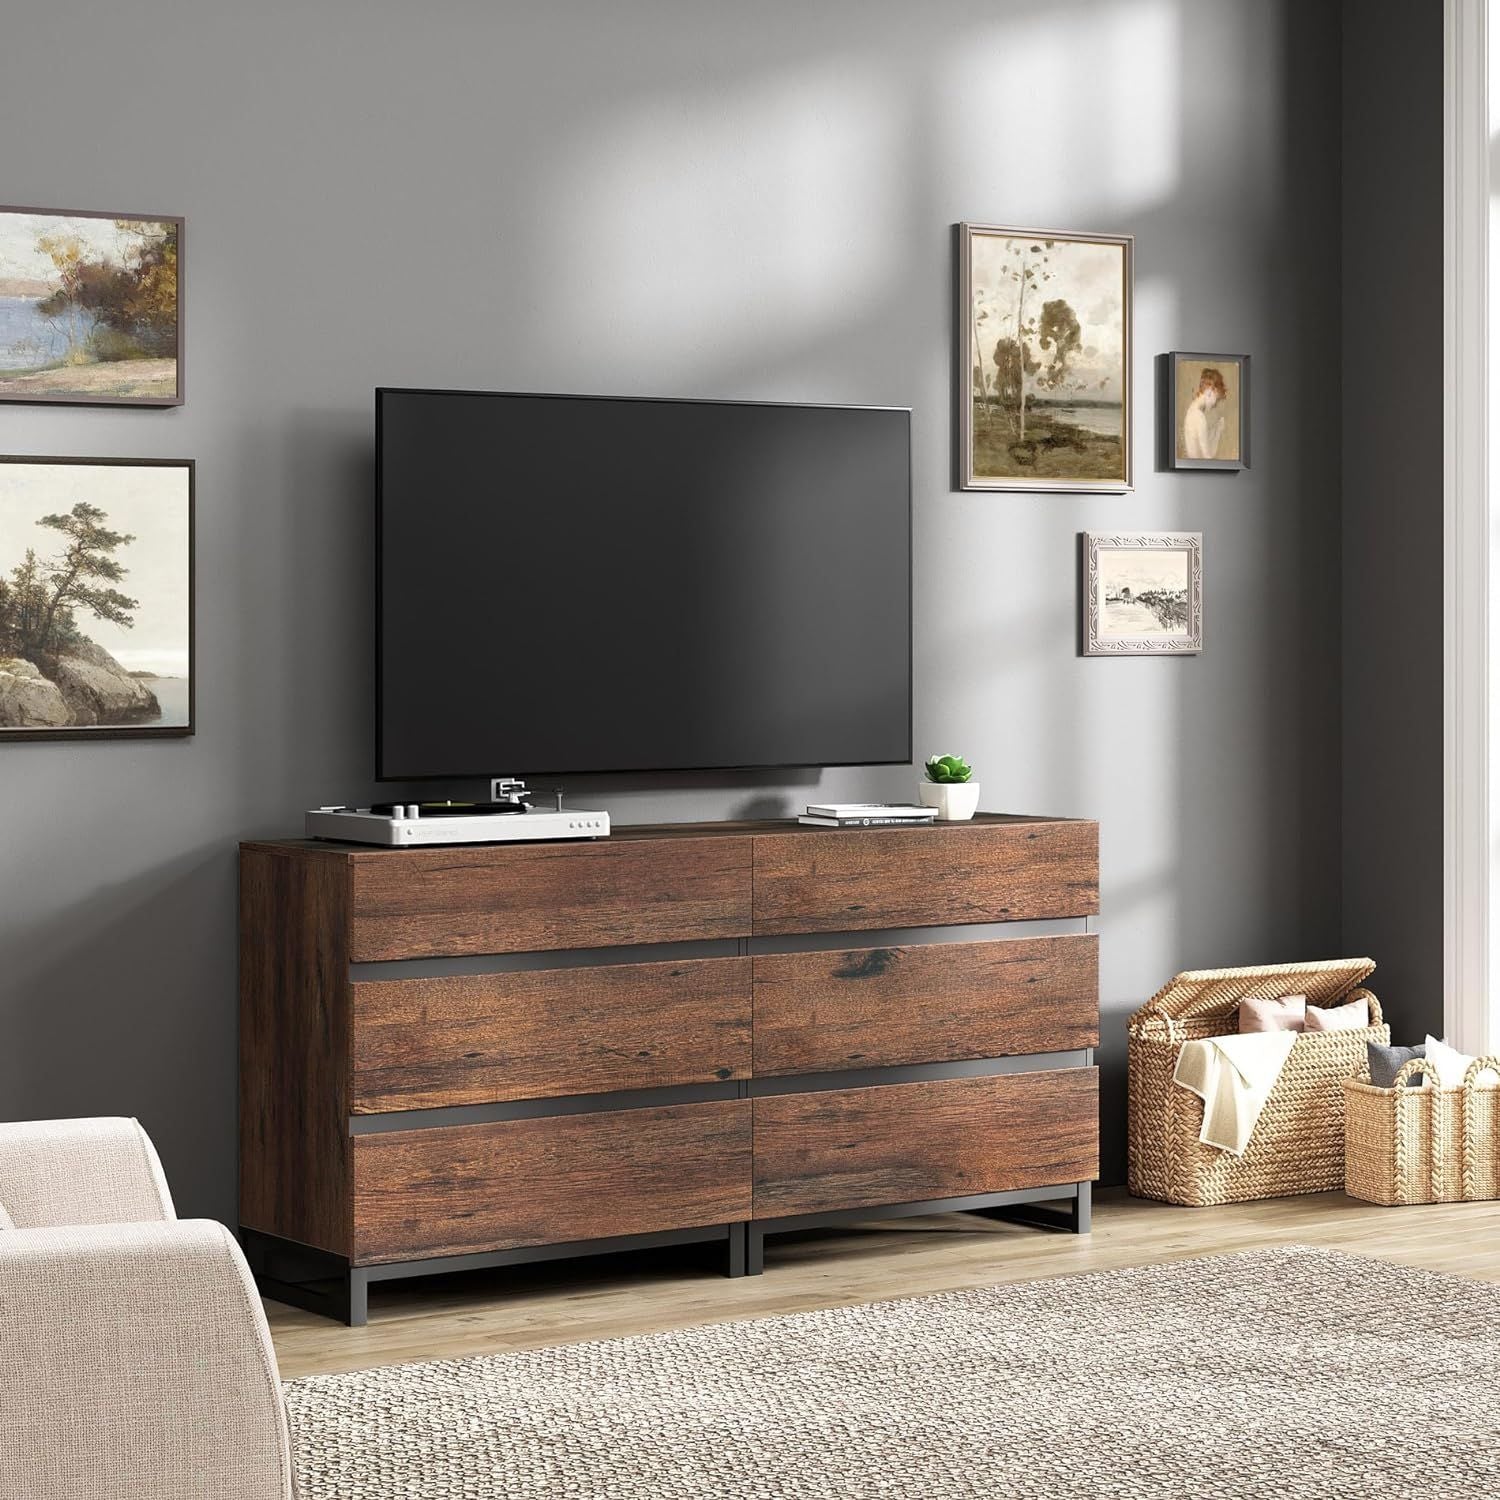 WAMPAT Modern TV Stand for TVs up to 42 inch, Entertainment Center TV Console with 3 Drawers & Metal Base, Media Console for Living Room, Bedroom, Brown